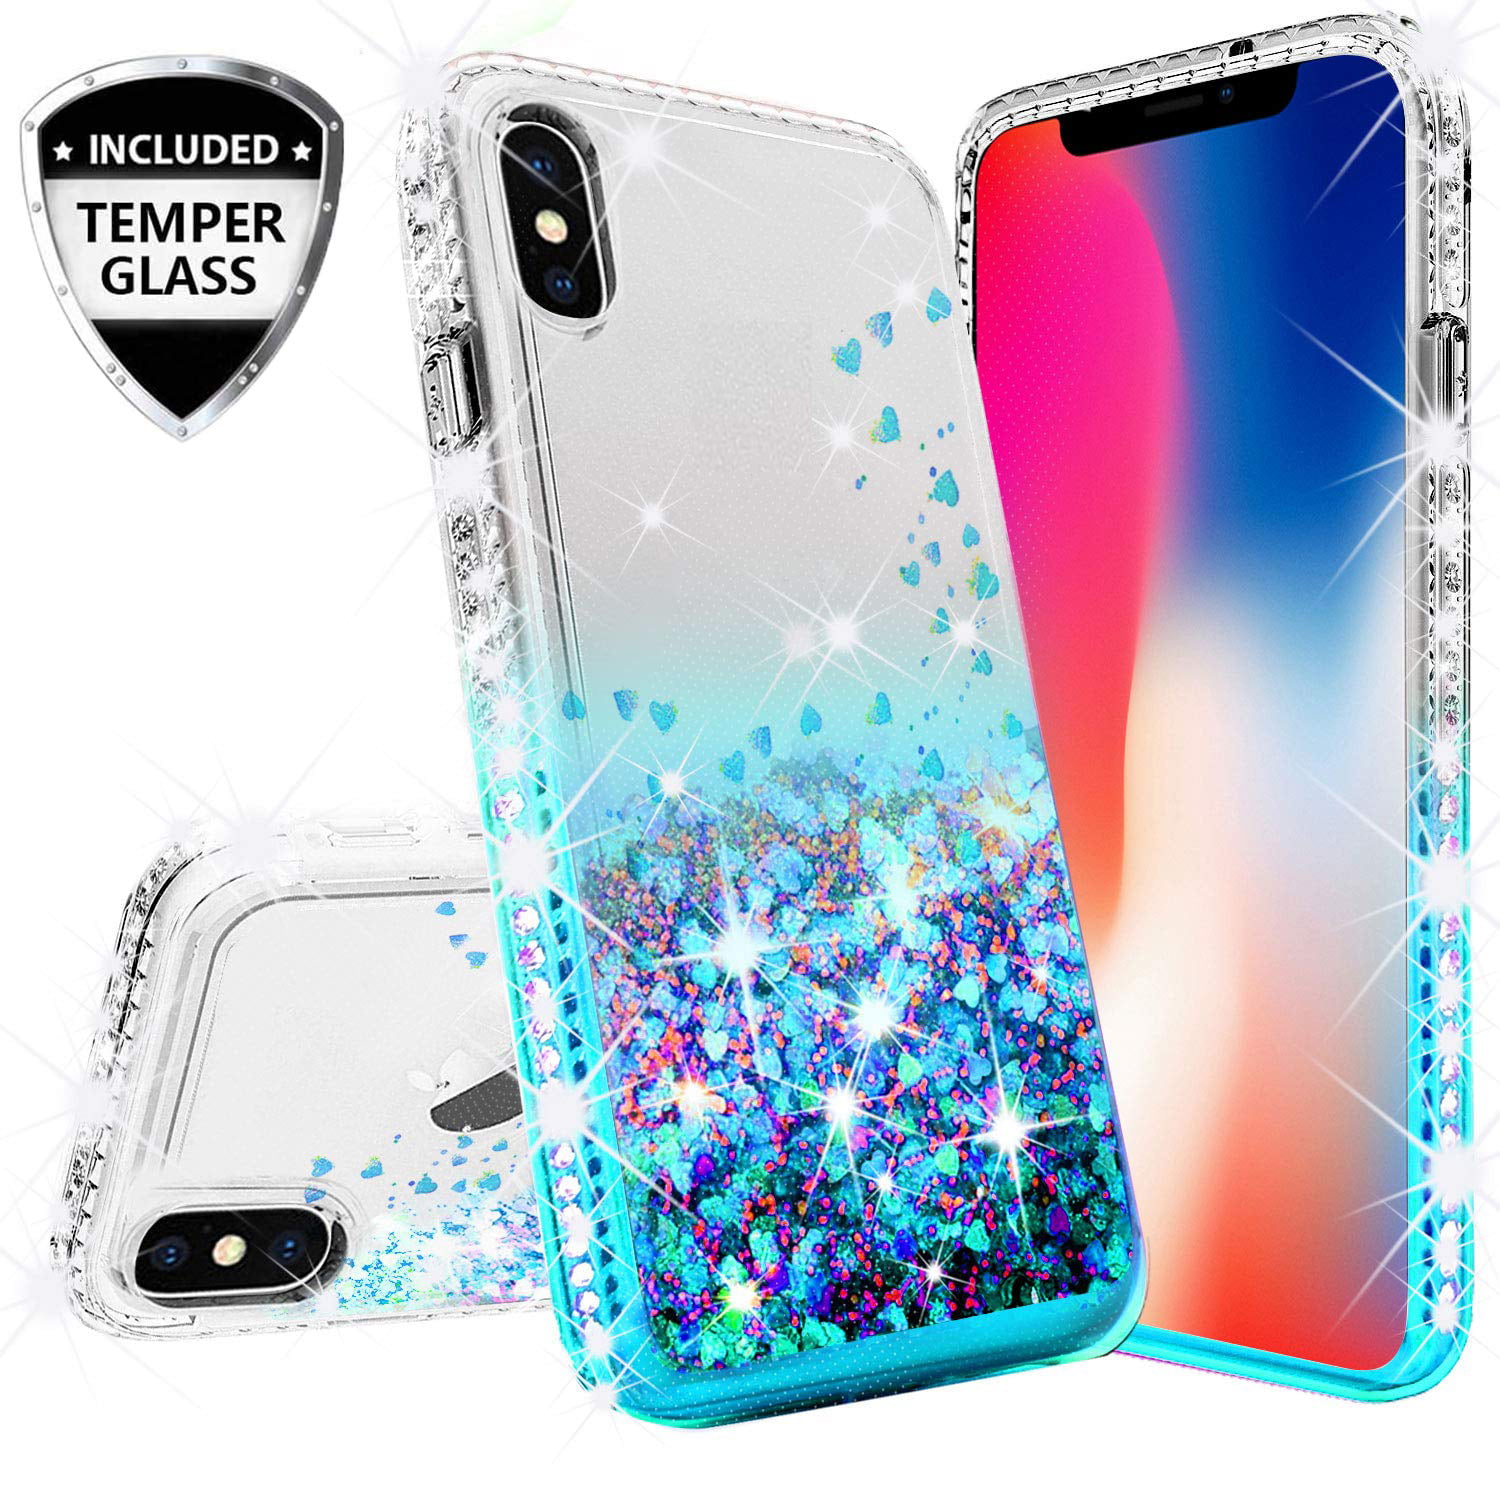 - Case Soft Slim Smooth Flexible Protective Phone Cover Light Blue Matte kwmobile TPU Case Compatible with Huawei Y9 Prime 2019